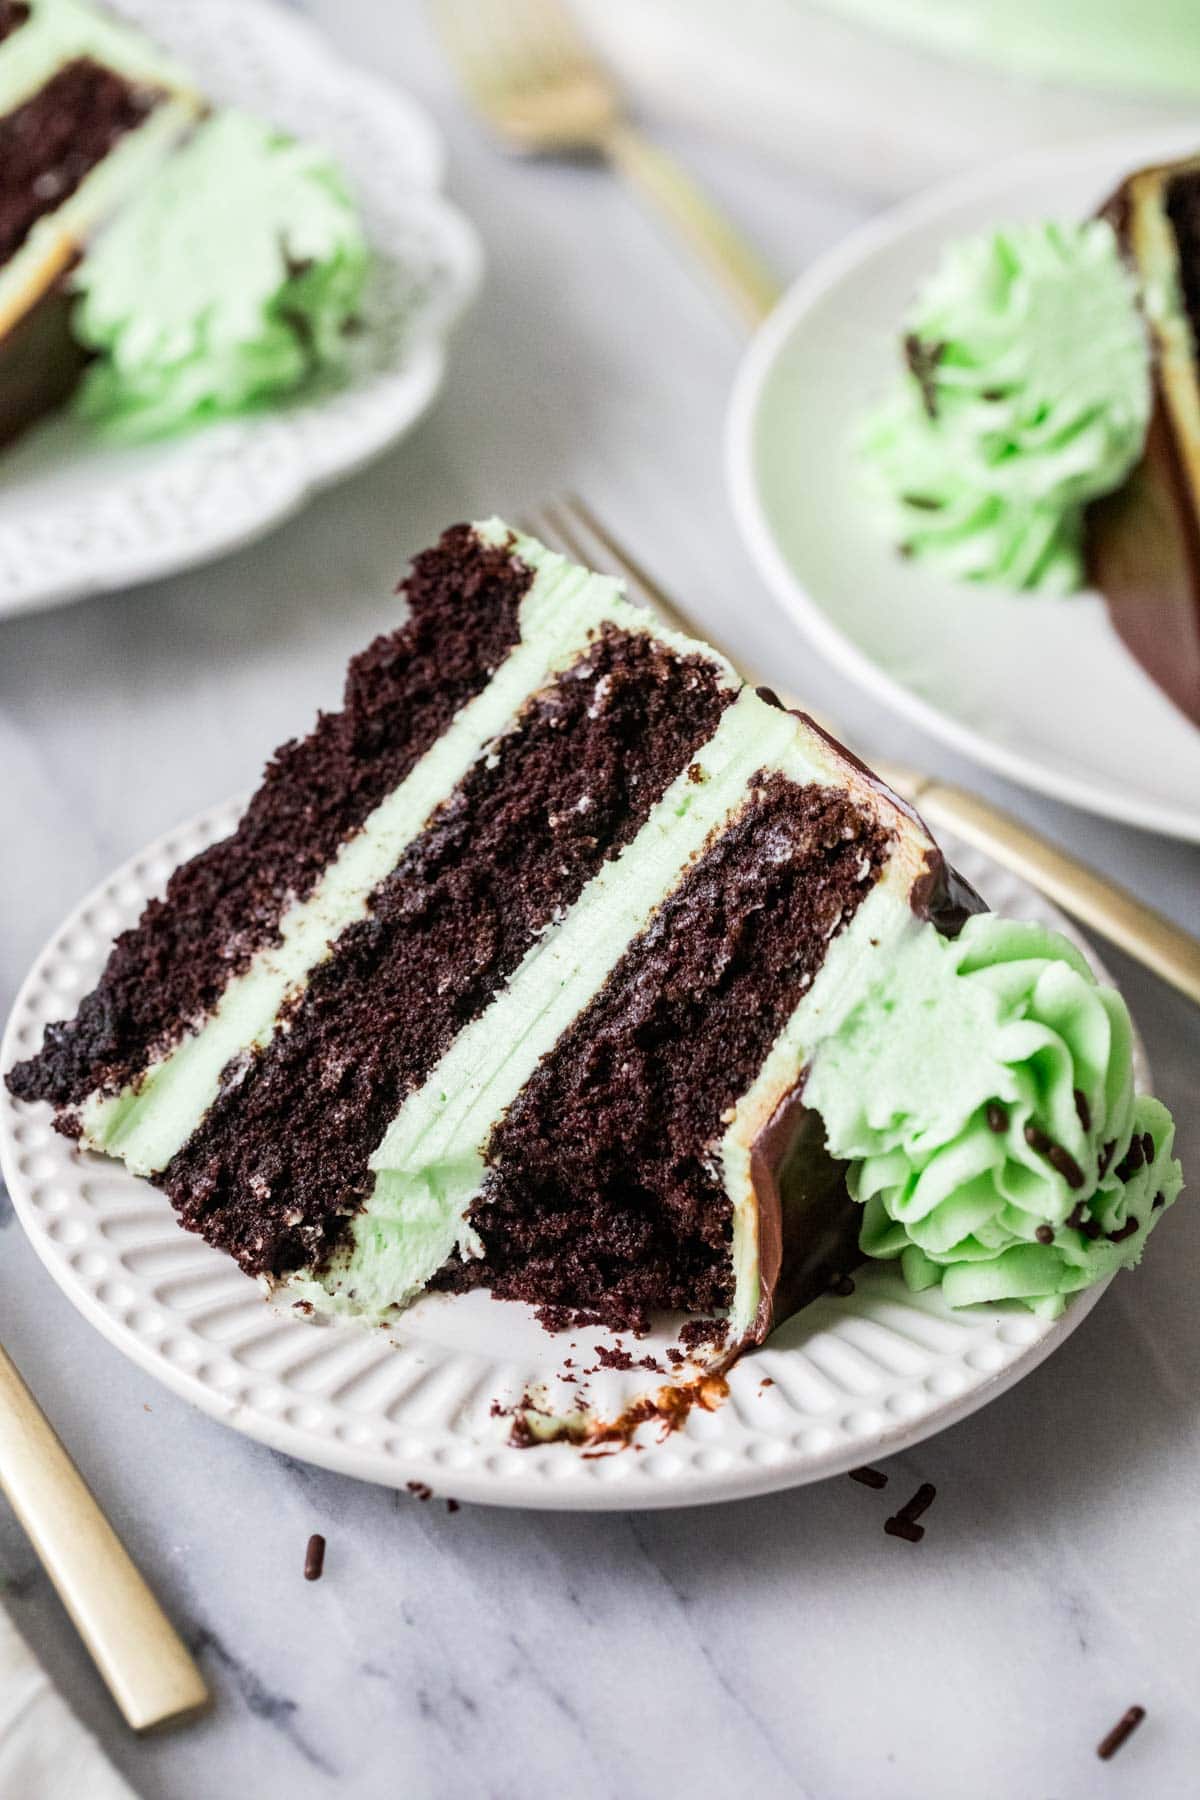 Slice of mint chocolate cake made with three layers of chocolate cake and a mint frosting.